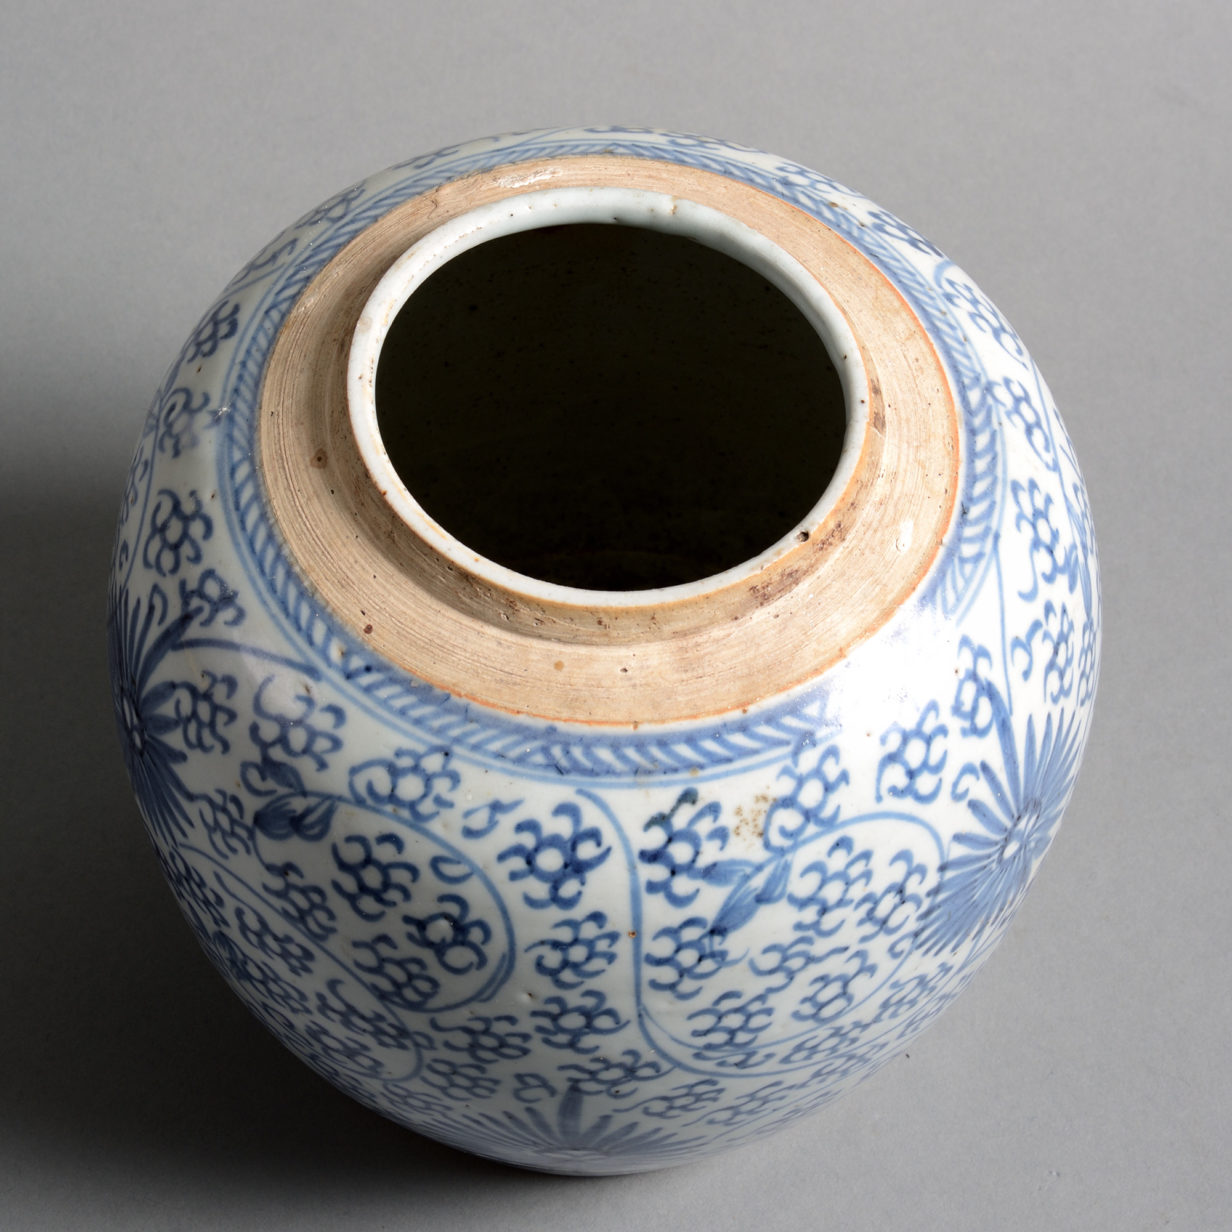 A Late 18th Century Qing Dynasty Blue & White Porcelain Jar